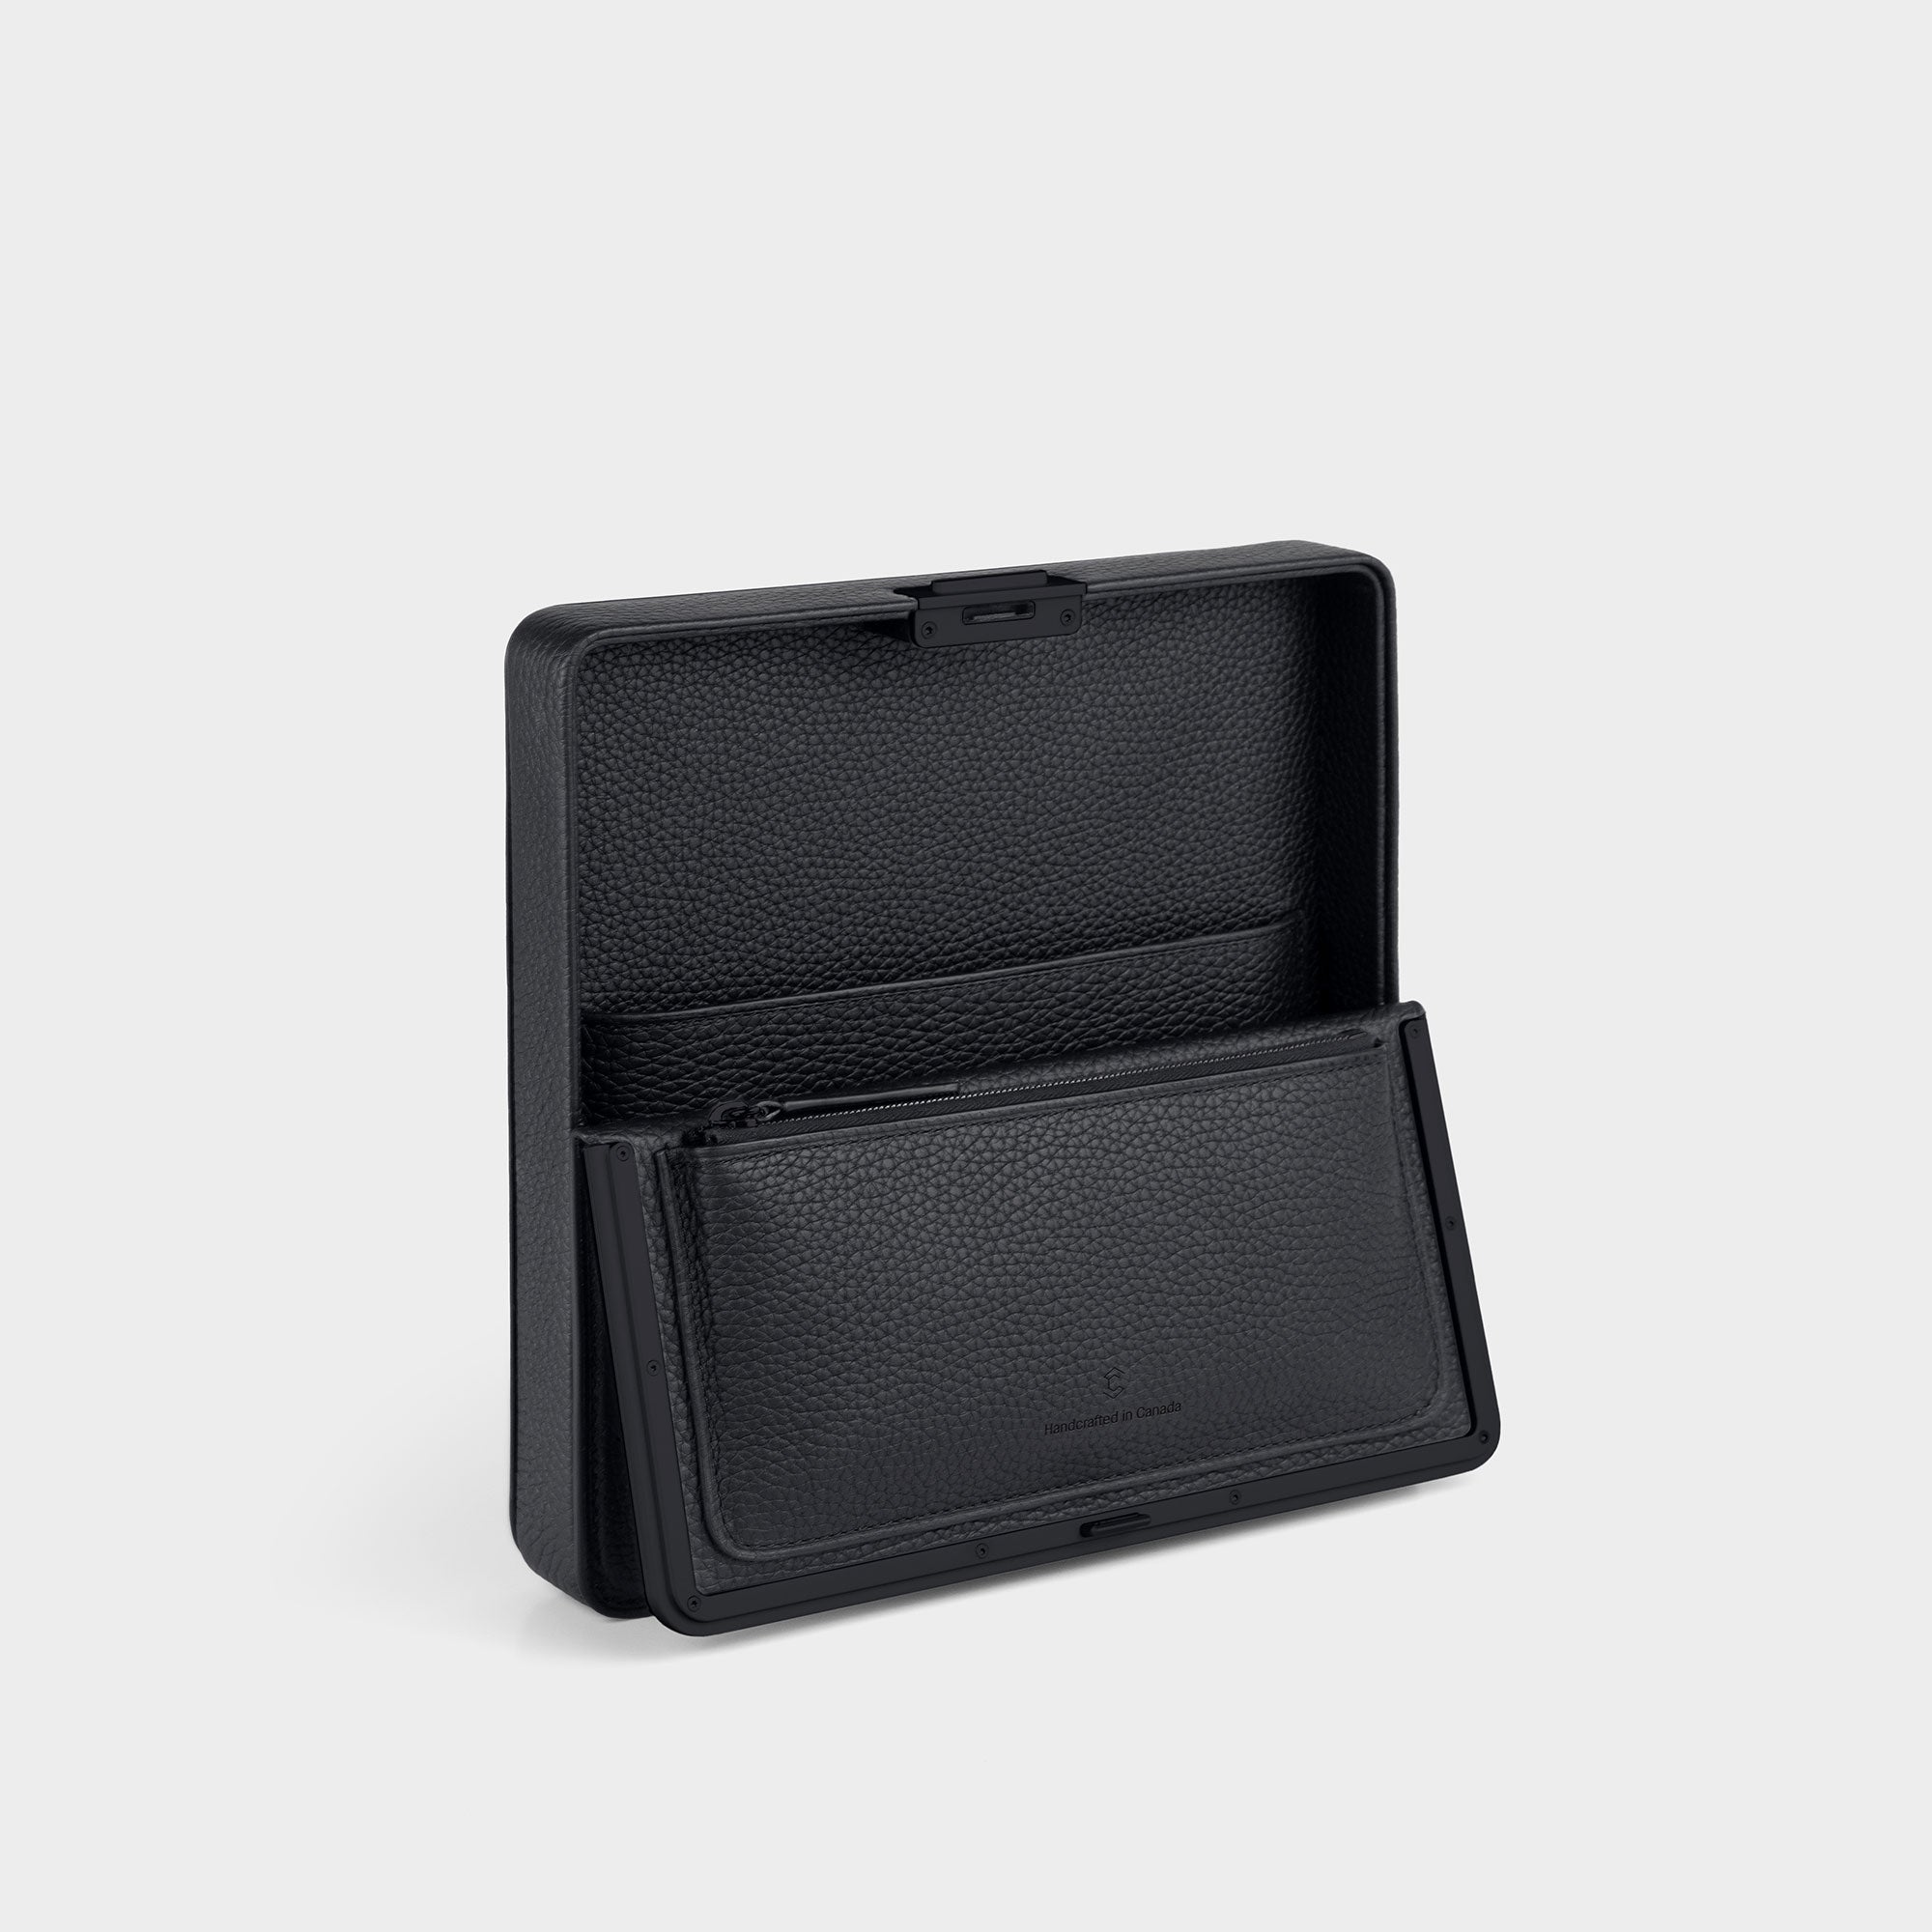 Product photo of the open all black Fraser Travel wallet showing the convenient interior zipped pouch and compartments. 